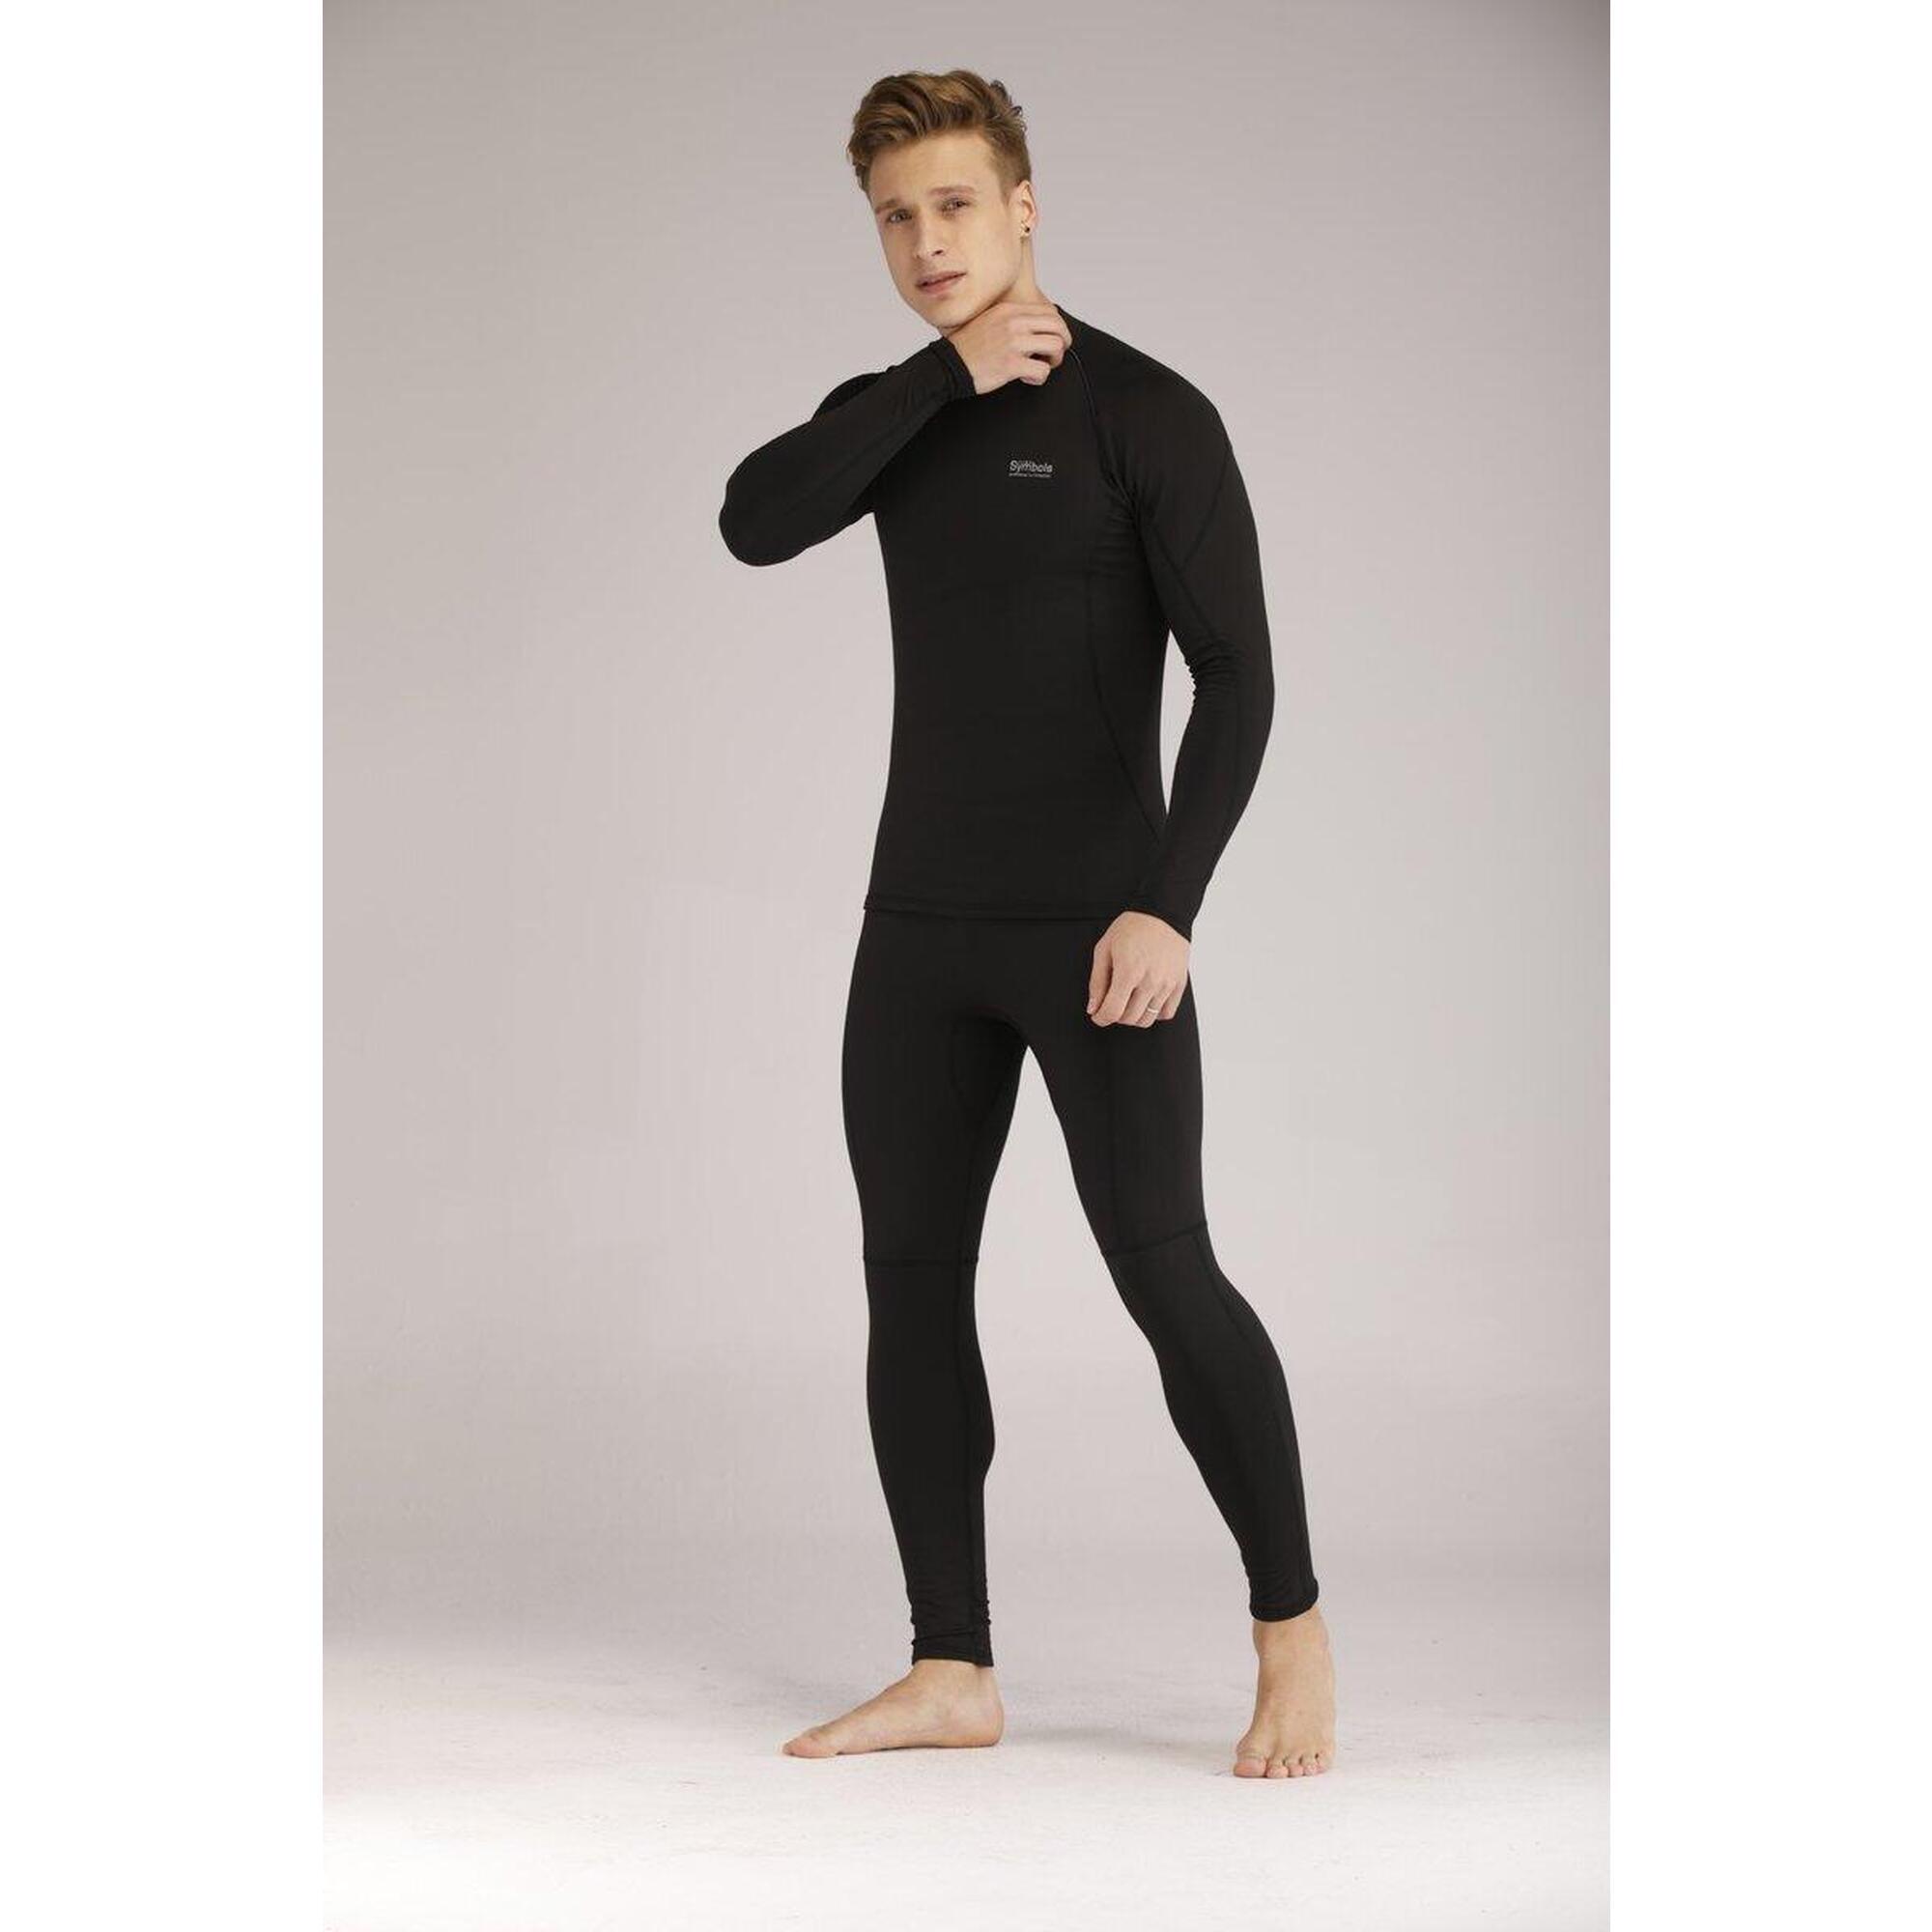 Adults 1.5mm Thick Thermal Fleece Top - BLACK